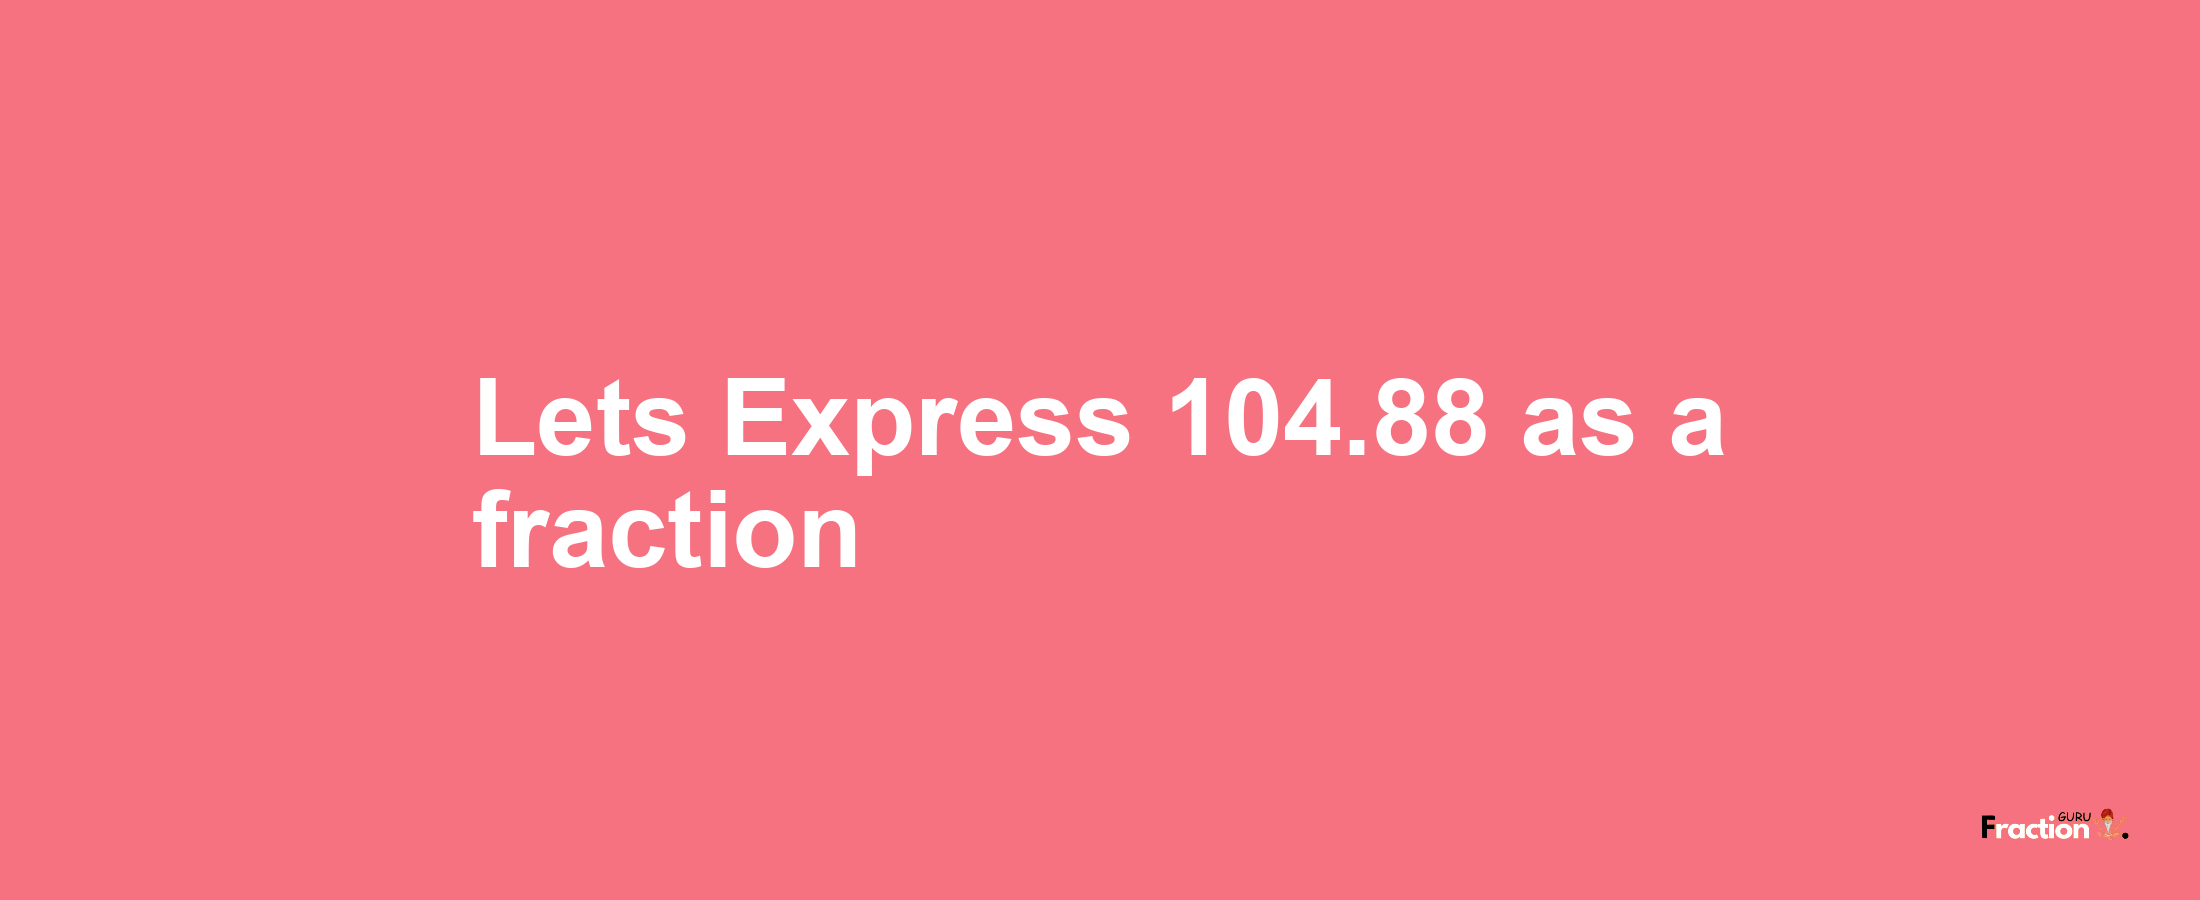 Lets Express 104.88 as afraction